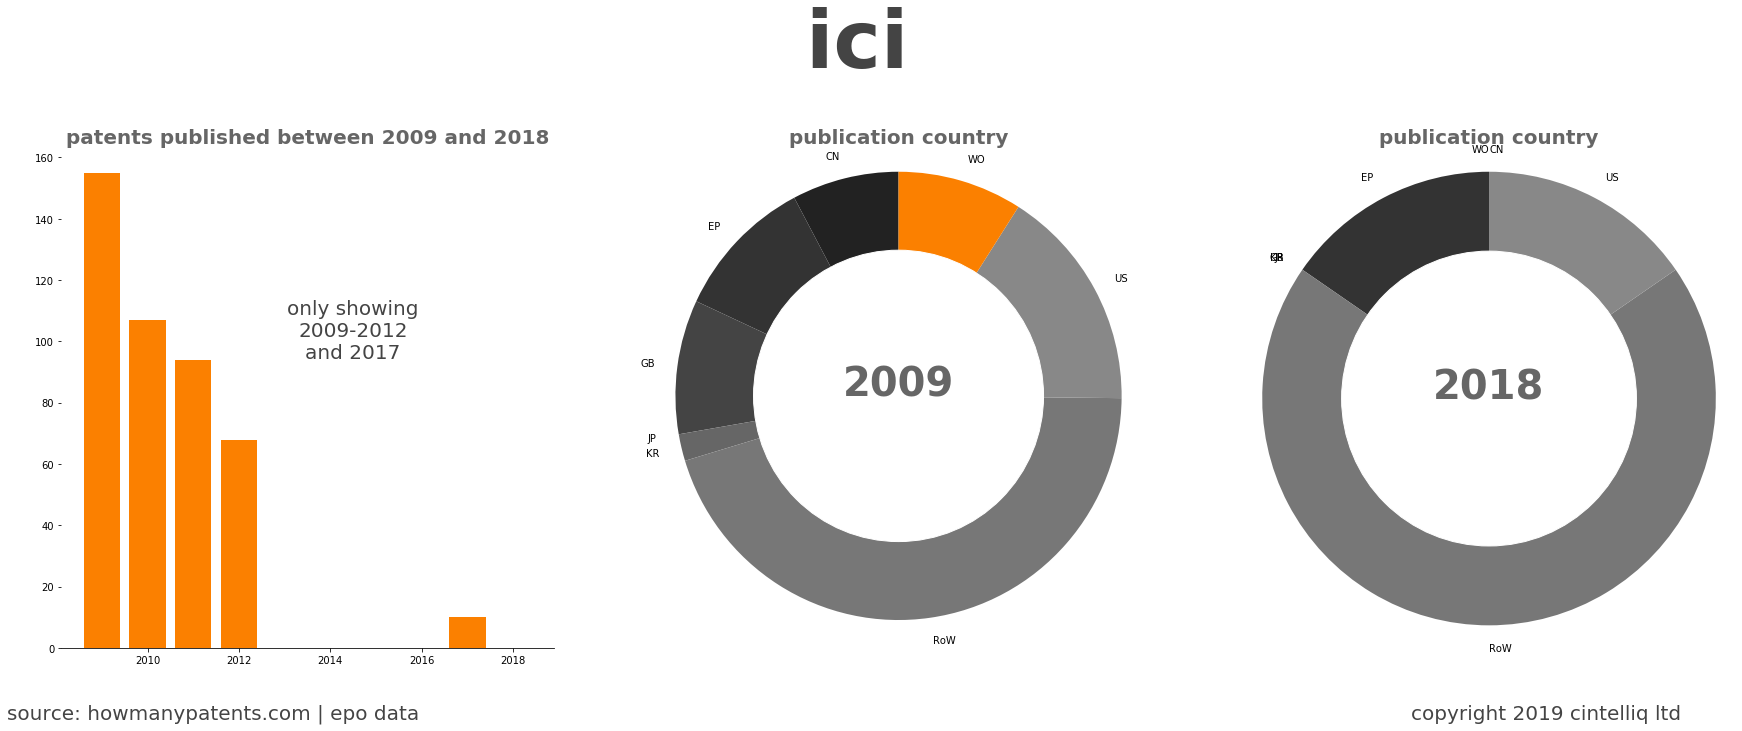 summary of patents for Ici 